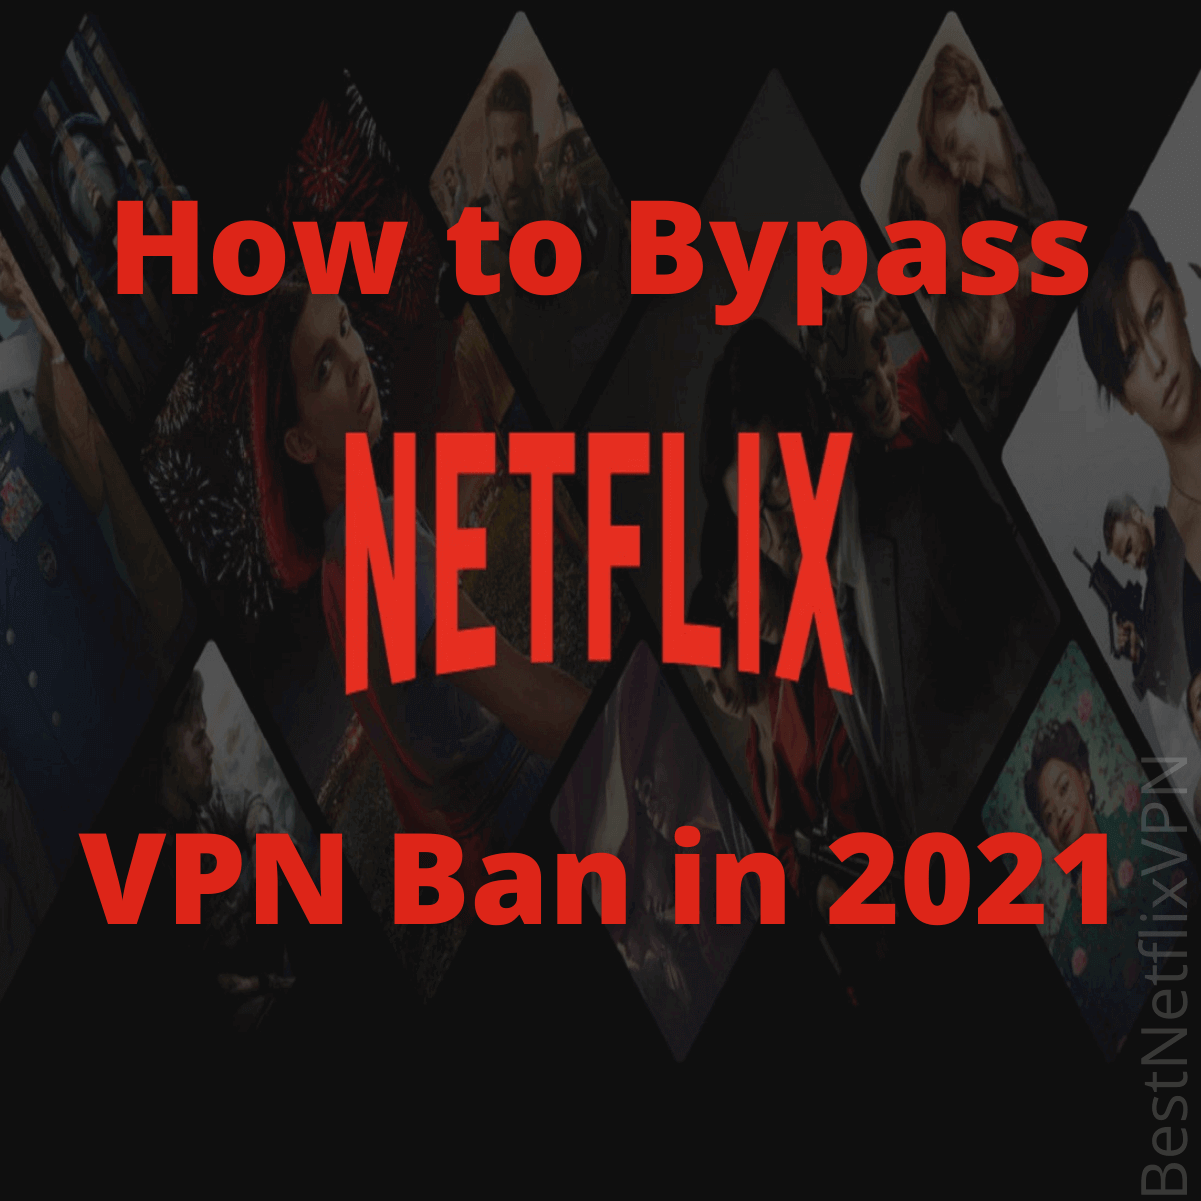 cant use vpn for netflix